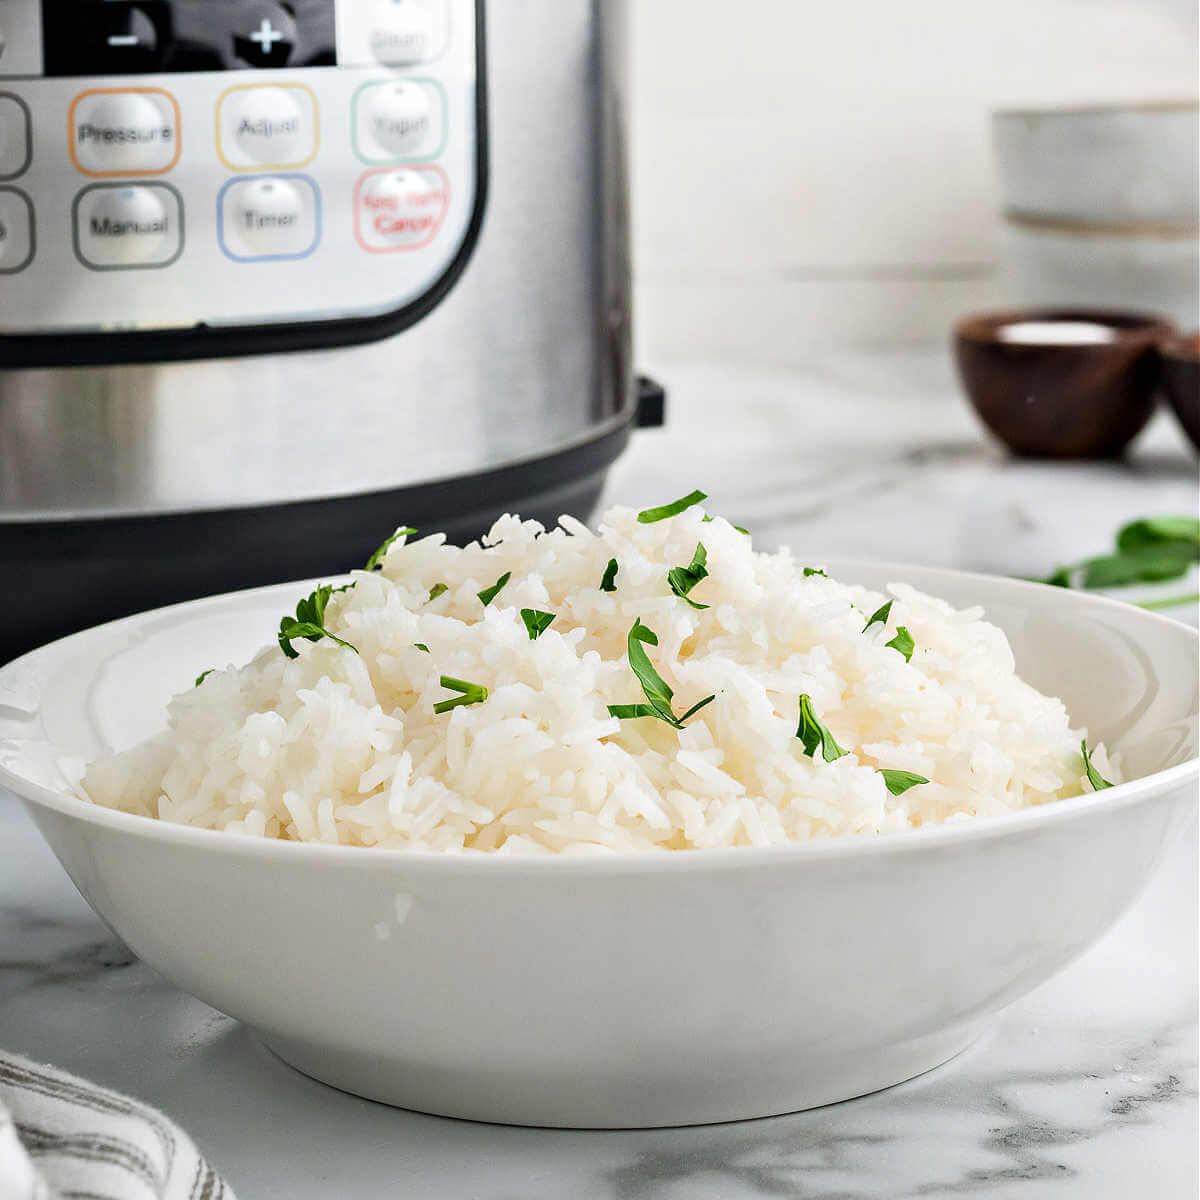 a bowl of jasmine rice on a table with an instant pot in the background.